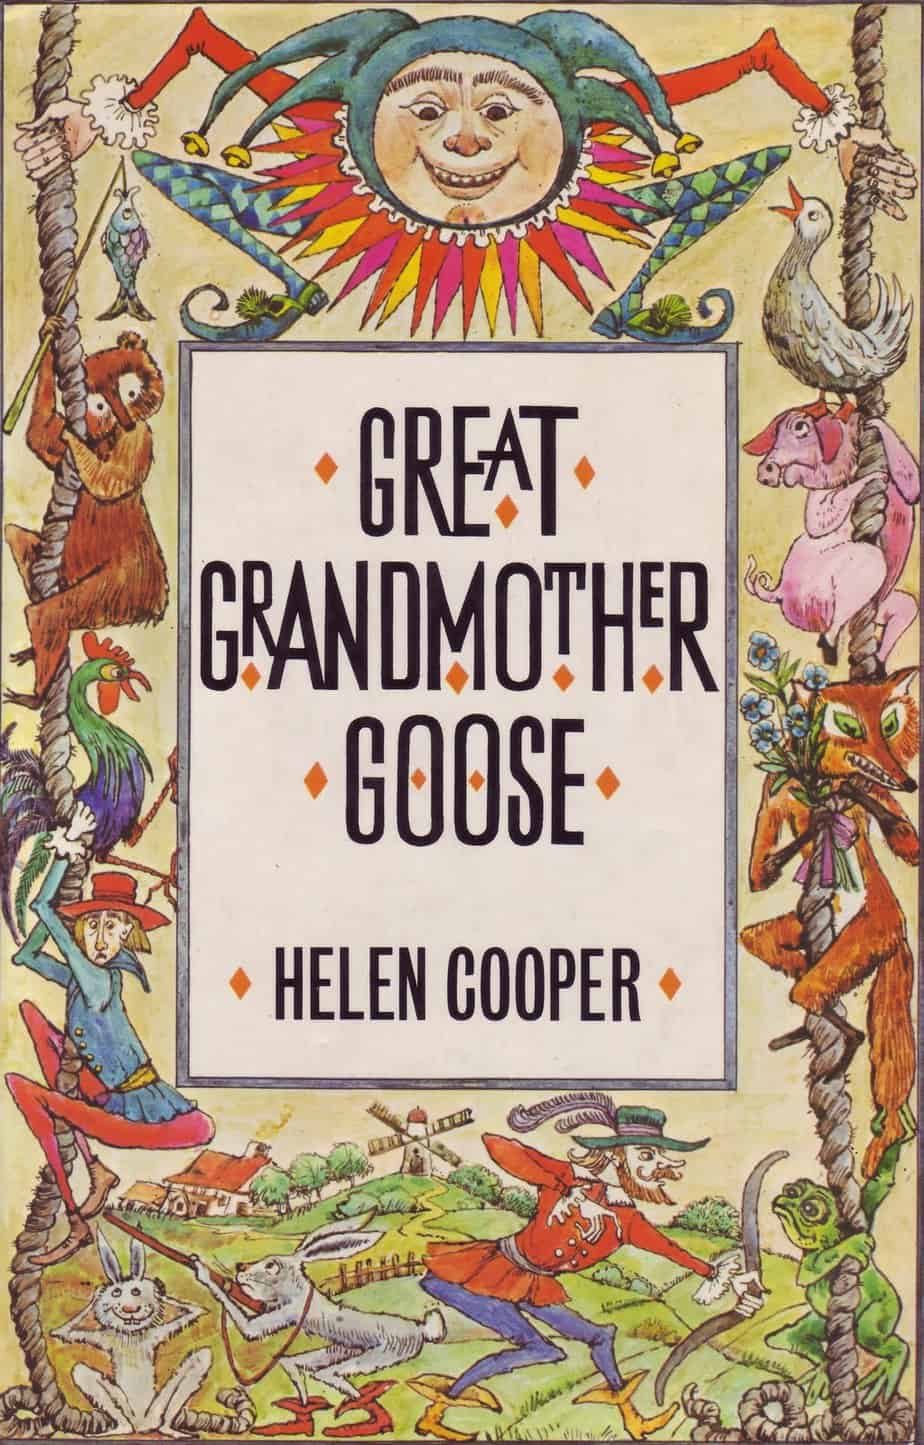 Great Grandmother Goose by Helen Cooper, illustrated by Krystyna Turska, Hamish Hamilton, London 1978 cover